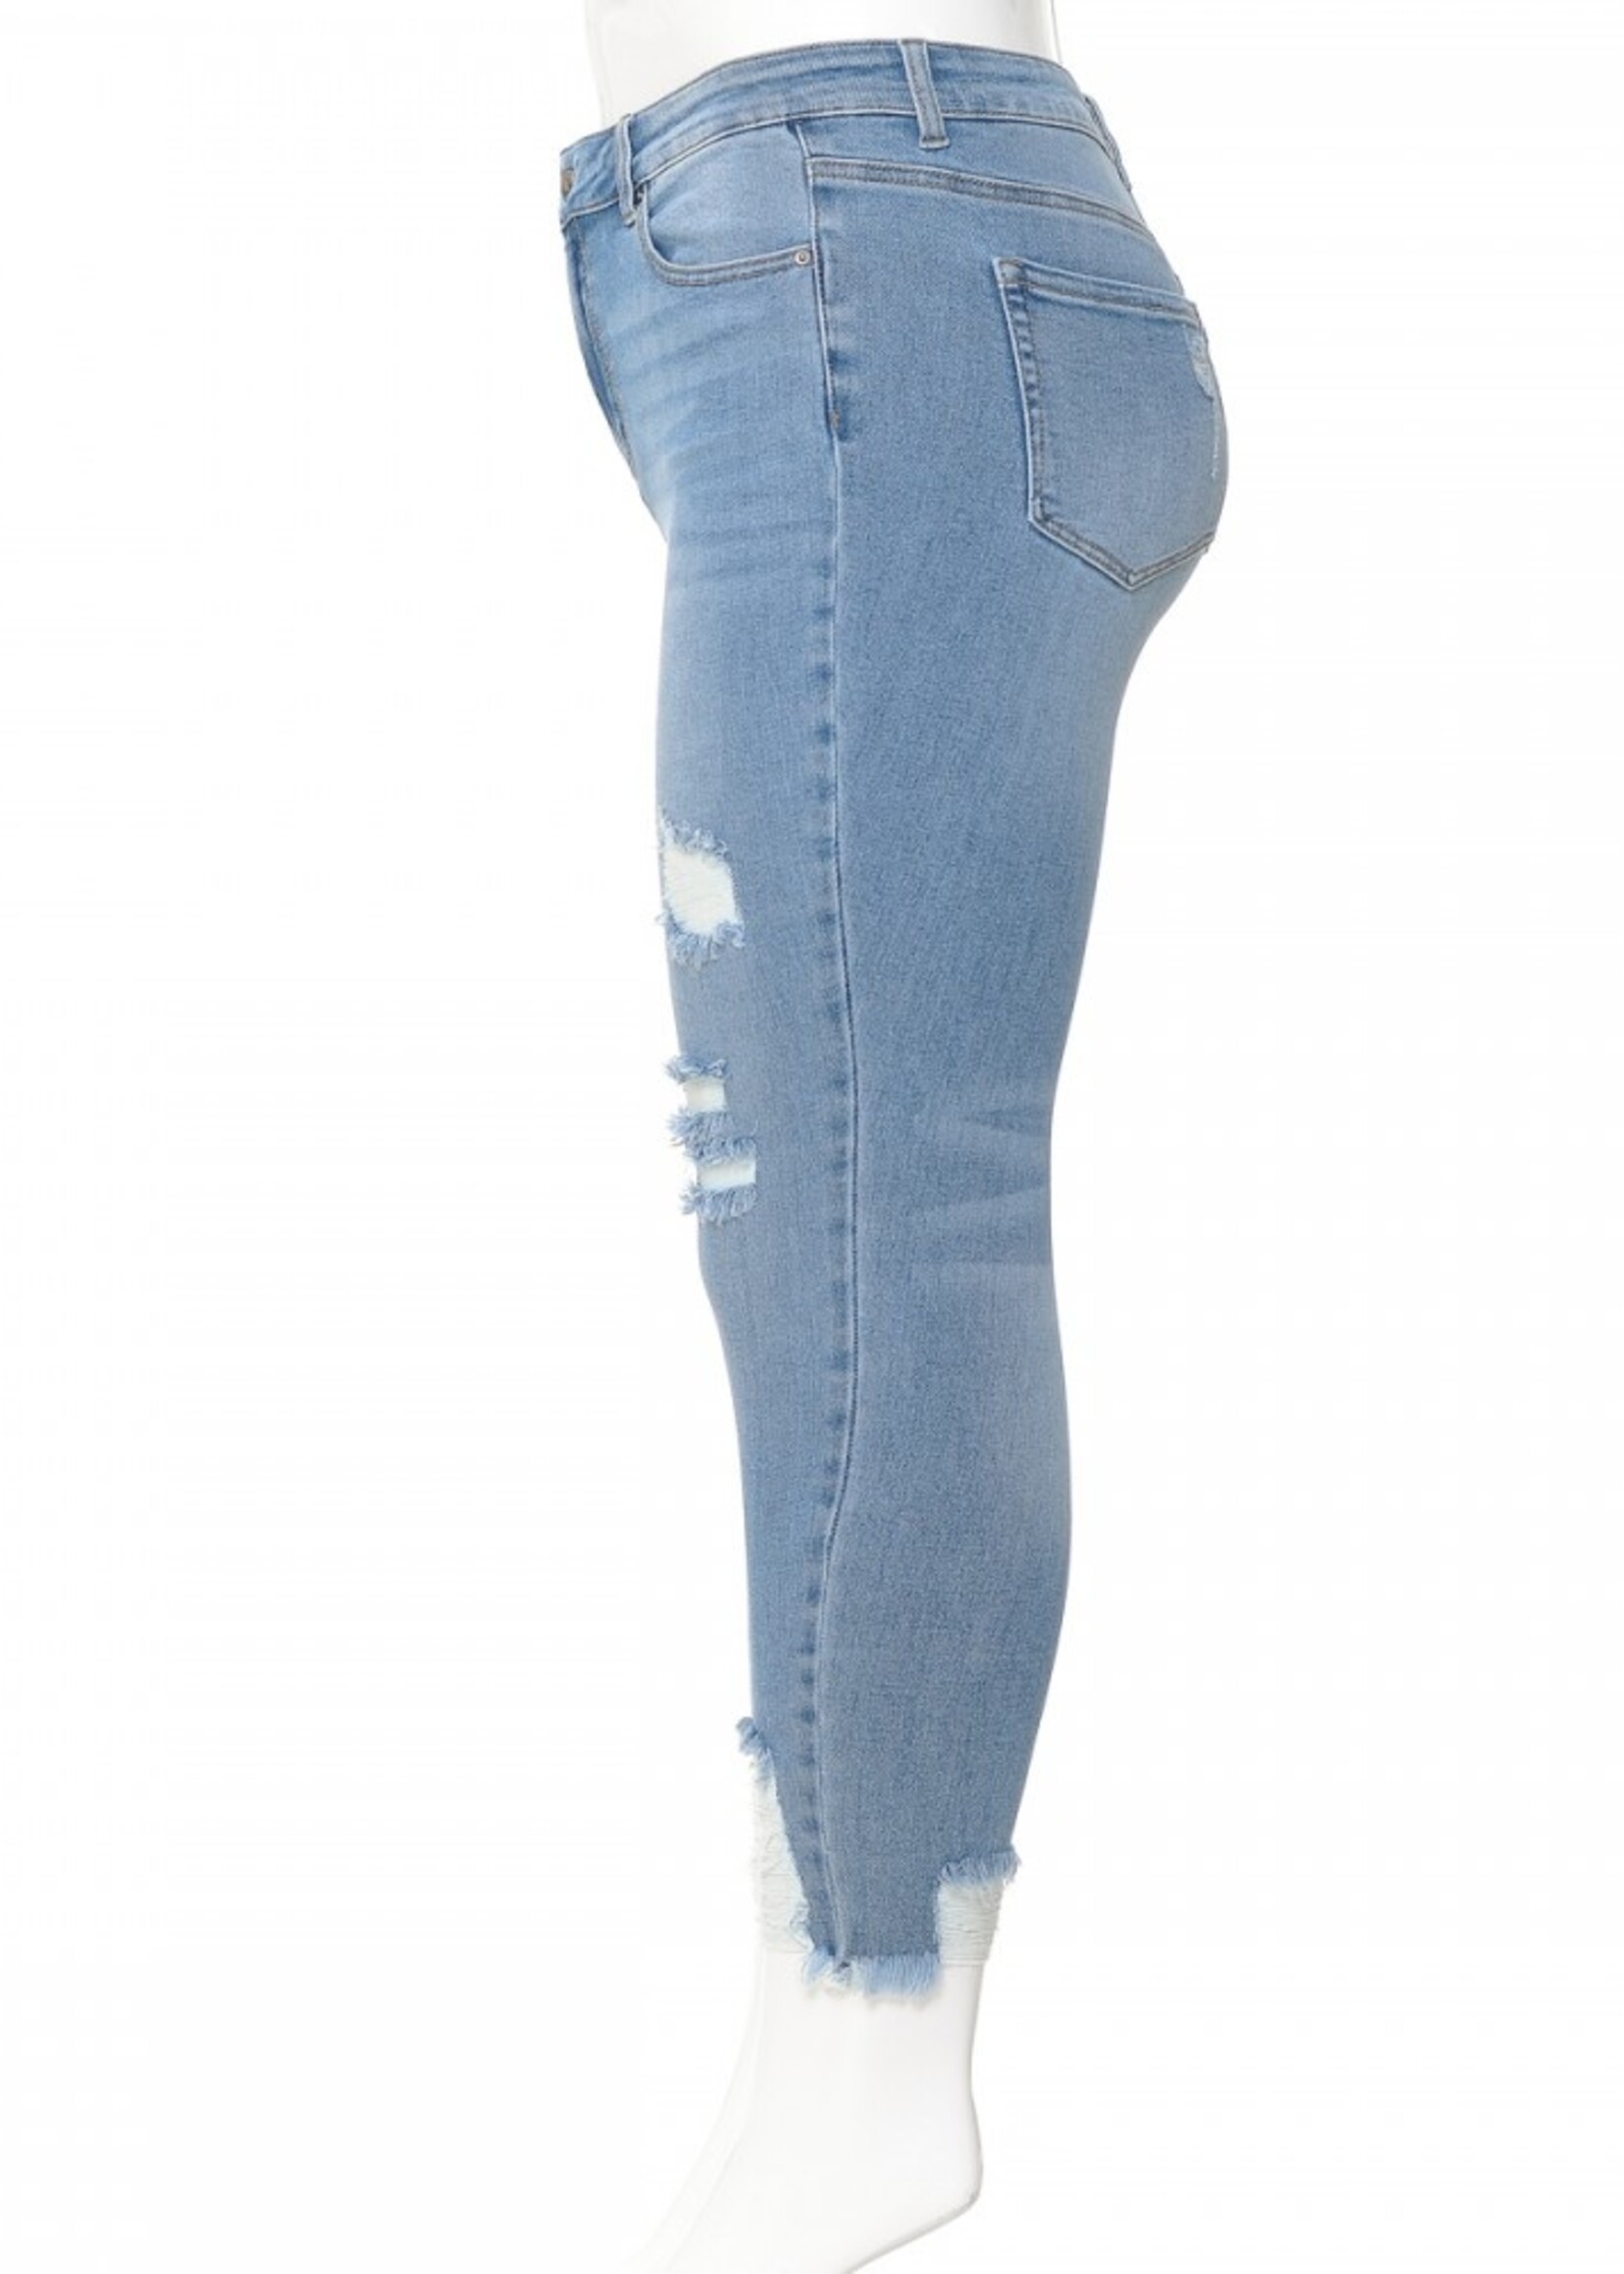 Wax Jeans - Womens Plus Size Distressed Jeans - 90188XL - Oly's